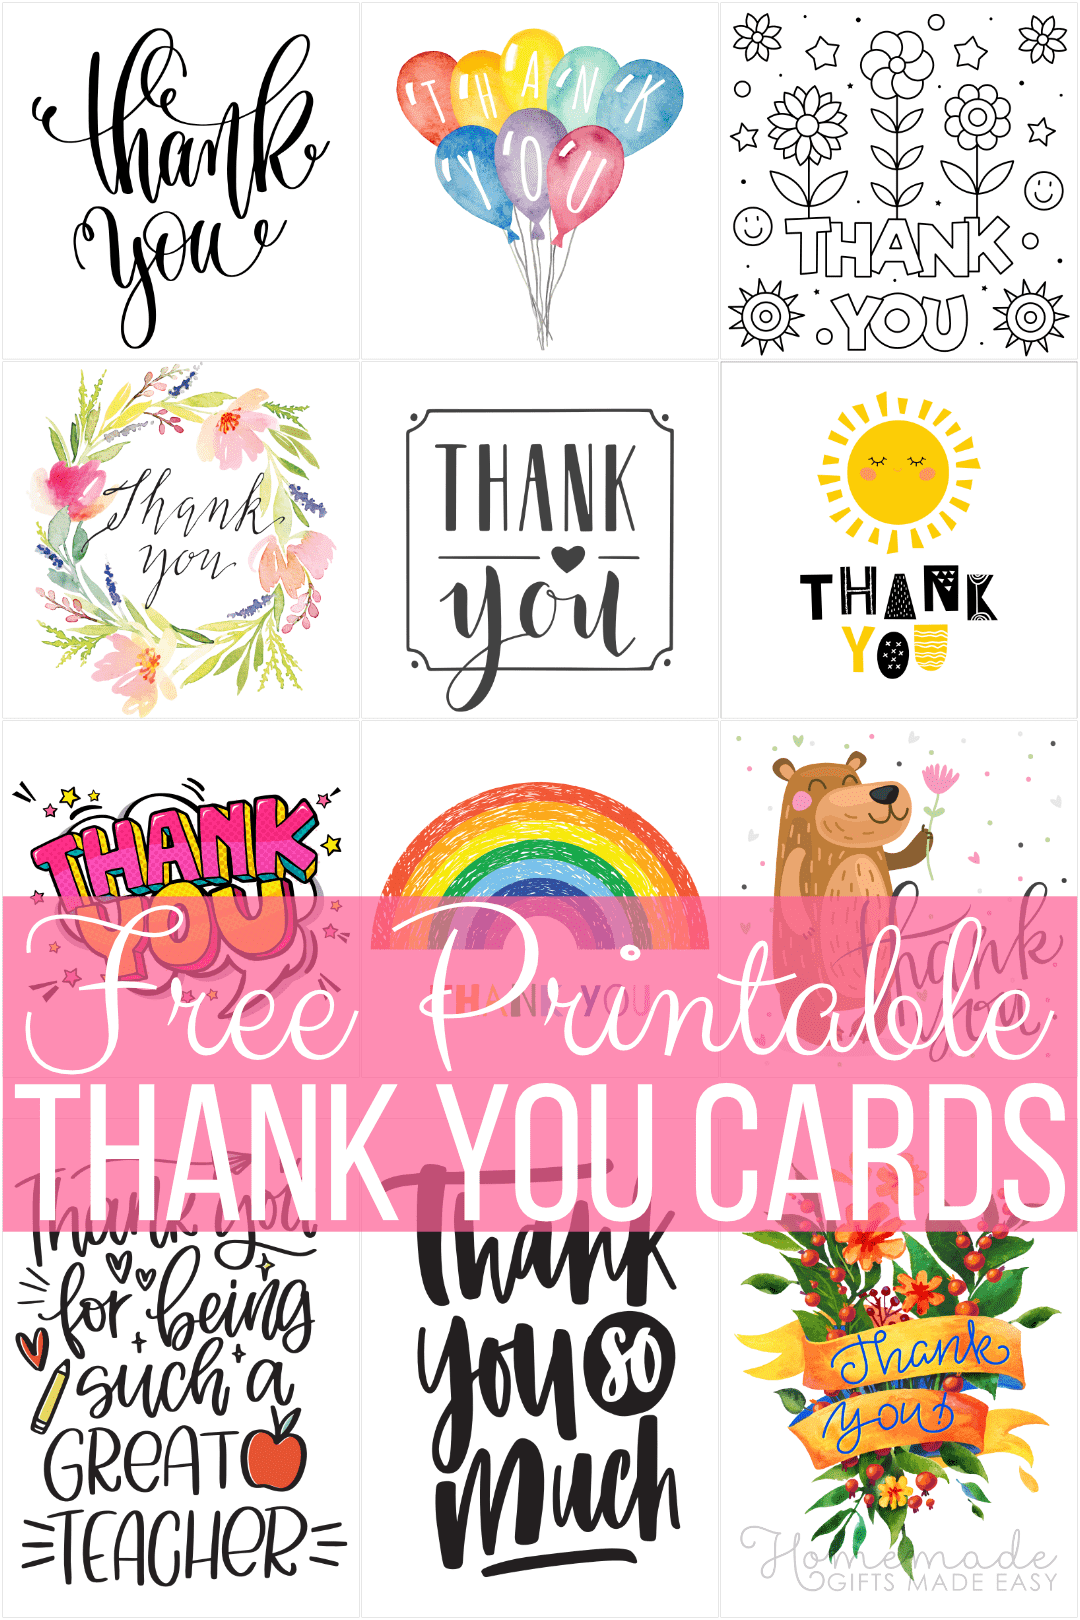 20 Free Printable Thank You Cards - Stylish High Quality Designs For Thank You Notes Templates